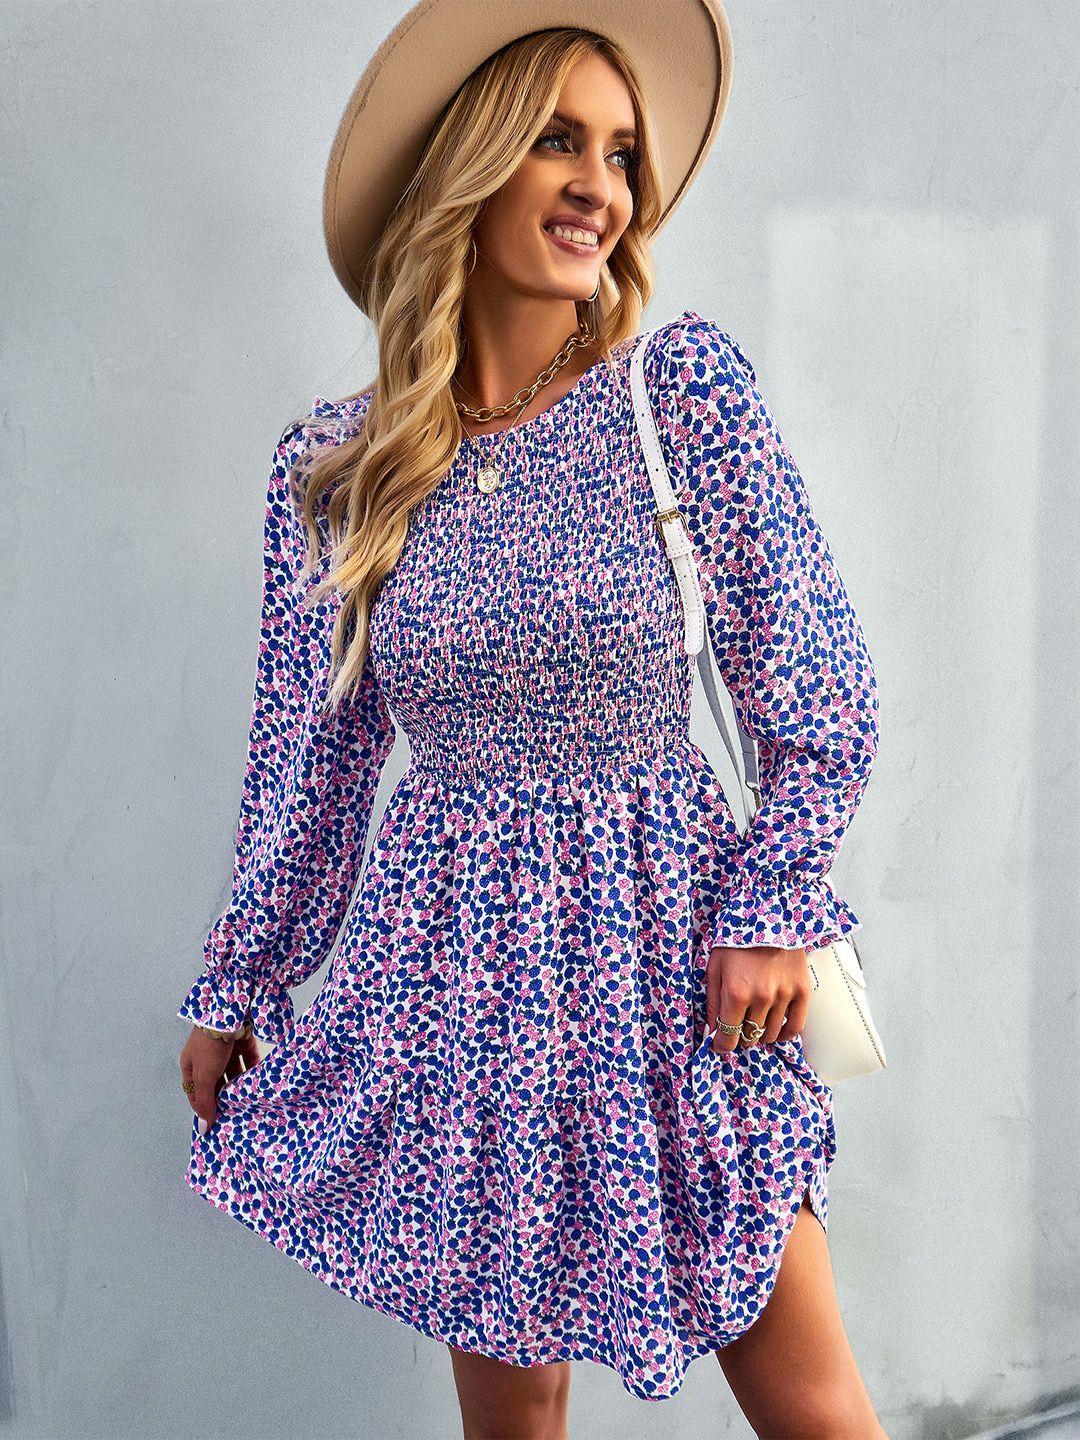 stylecast floral printed bell sleeves fit & flare dress